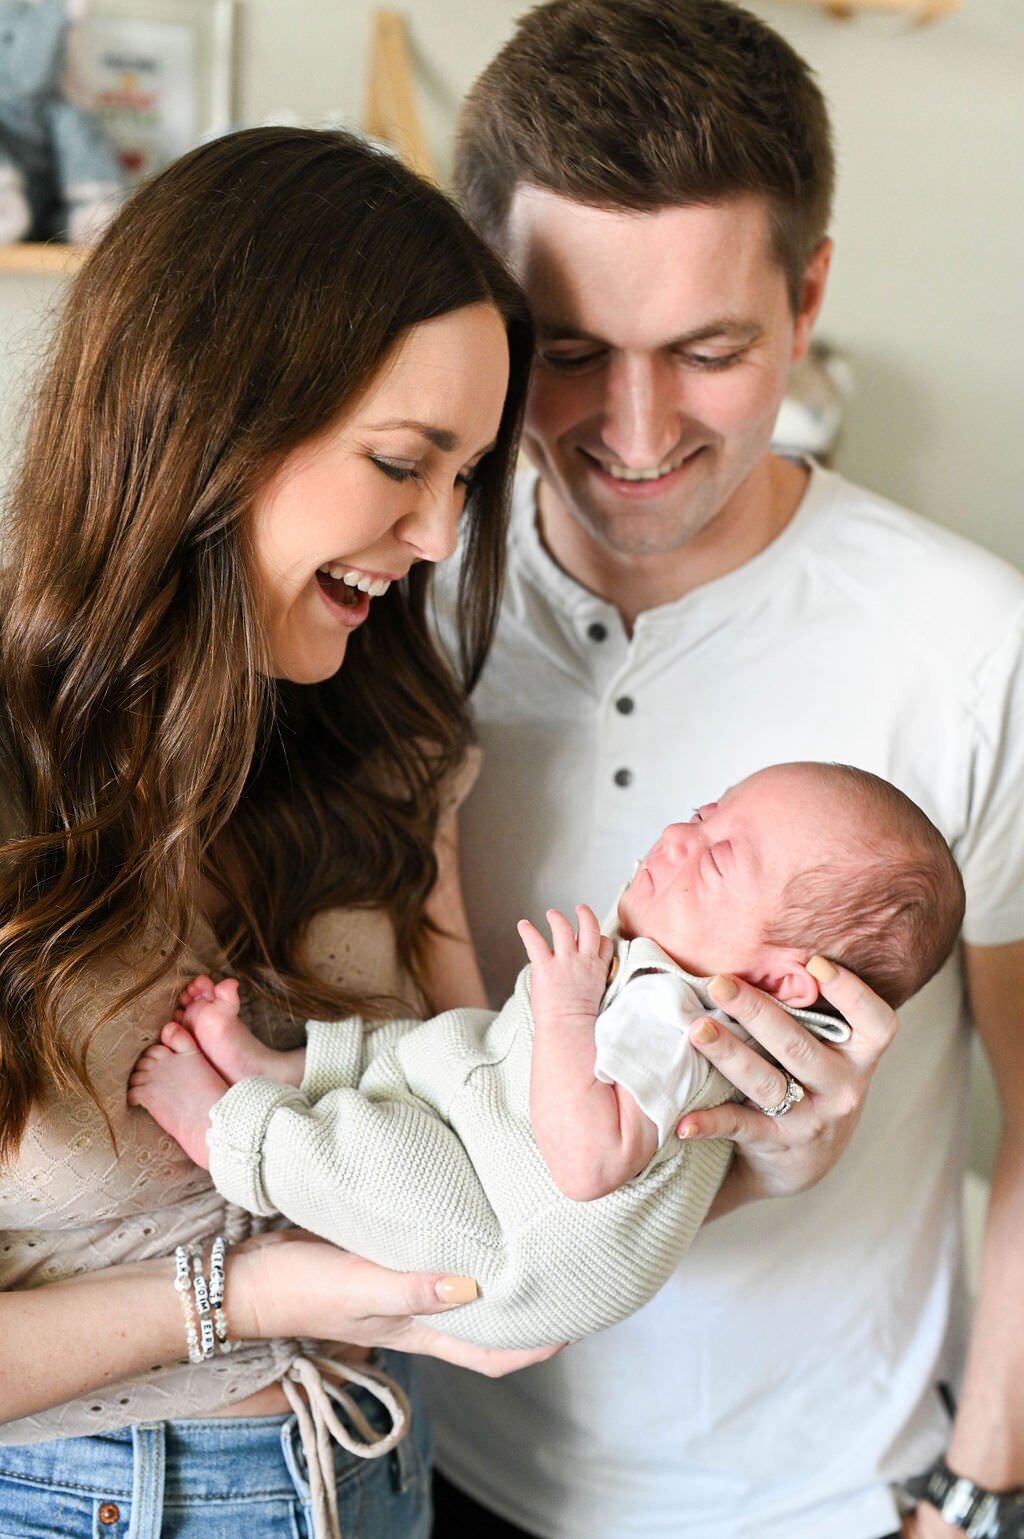 Parents smiling and holding a newborn.